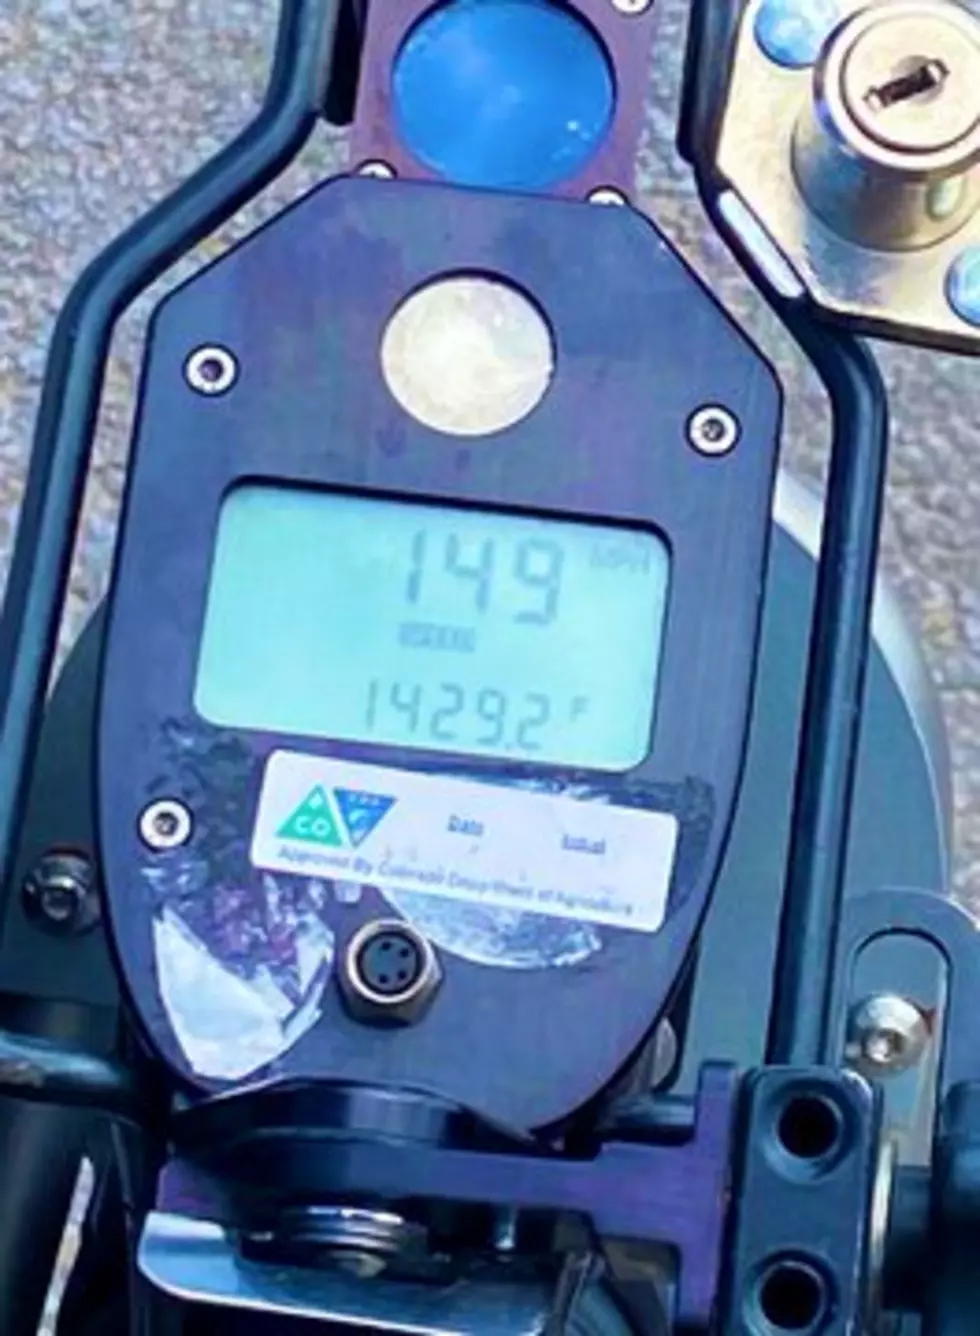 Colorado Driver Caught Going 84 MPH Over Speed Limit